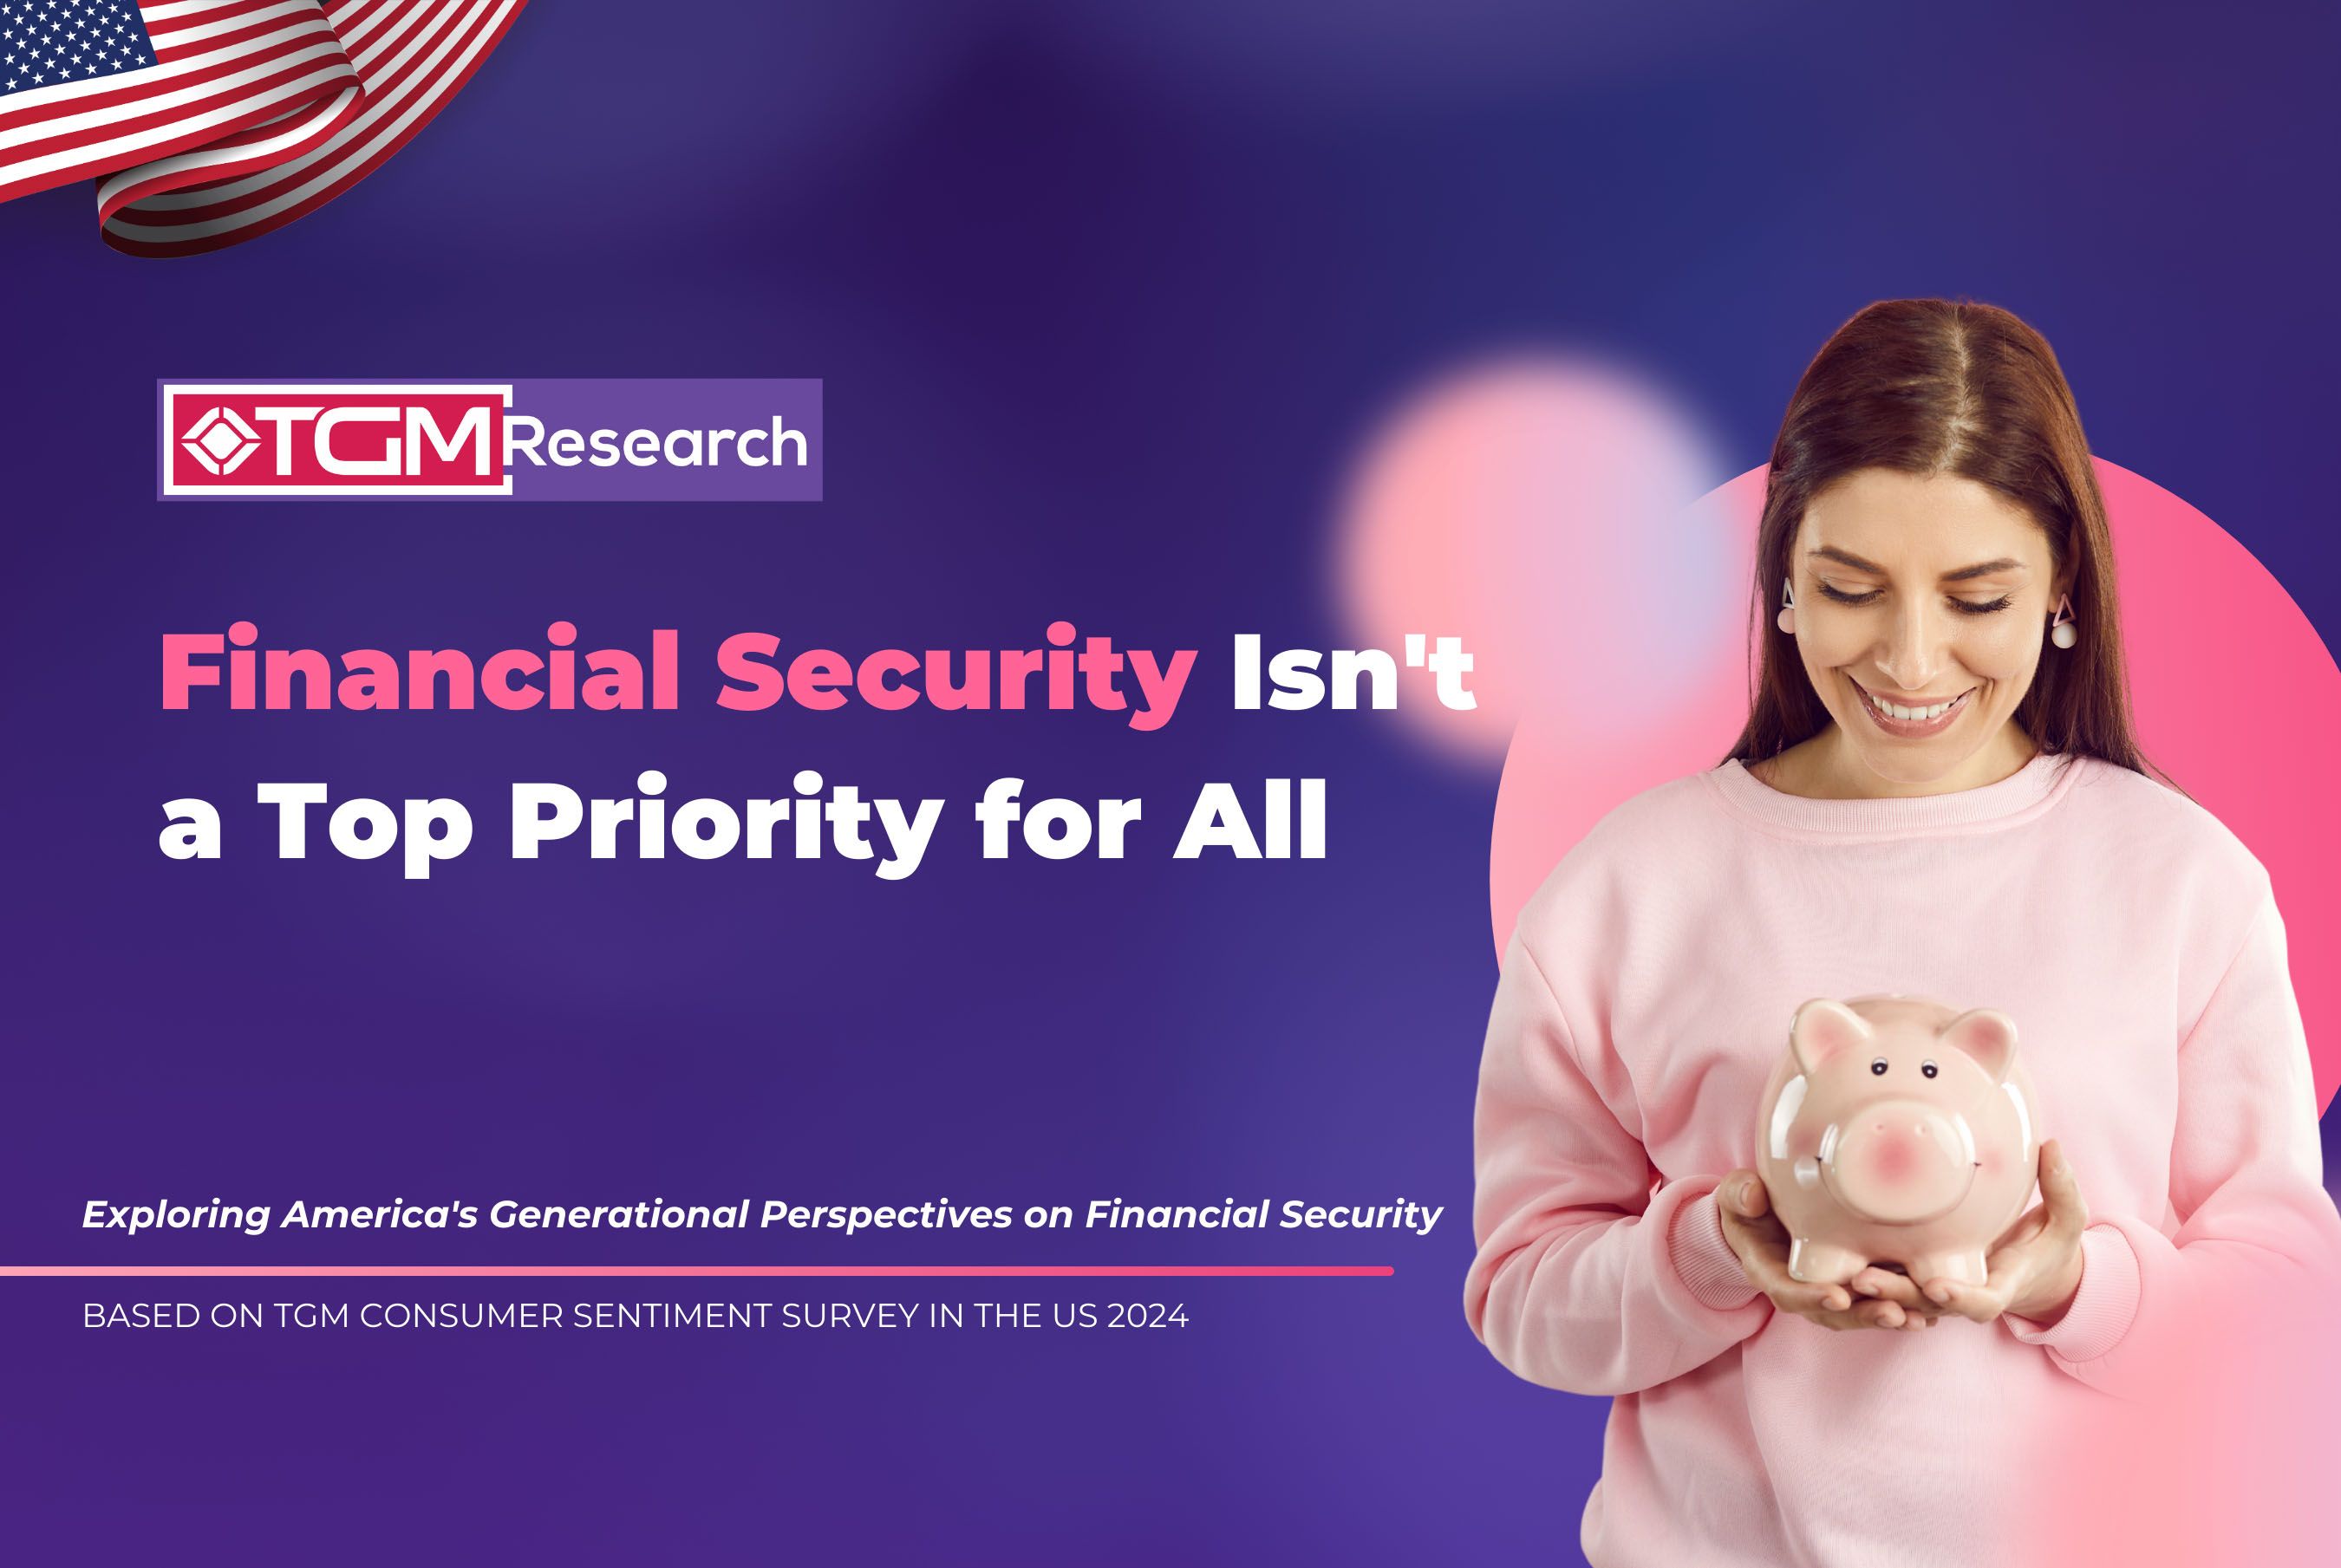 Financial Security Isn't a Top Priority for All